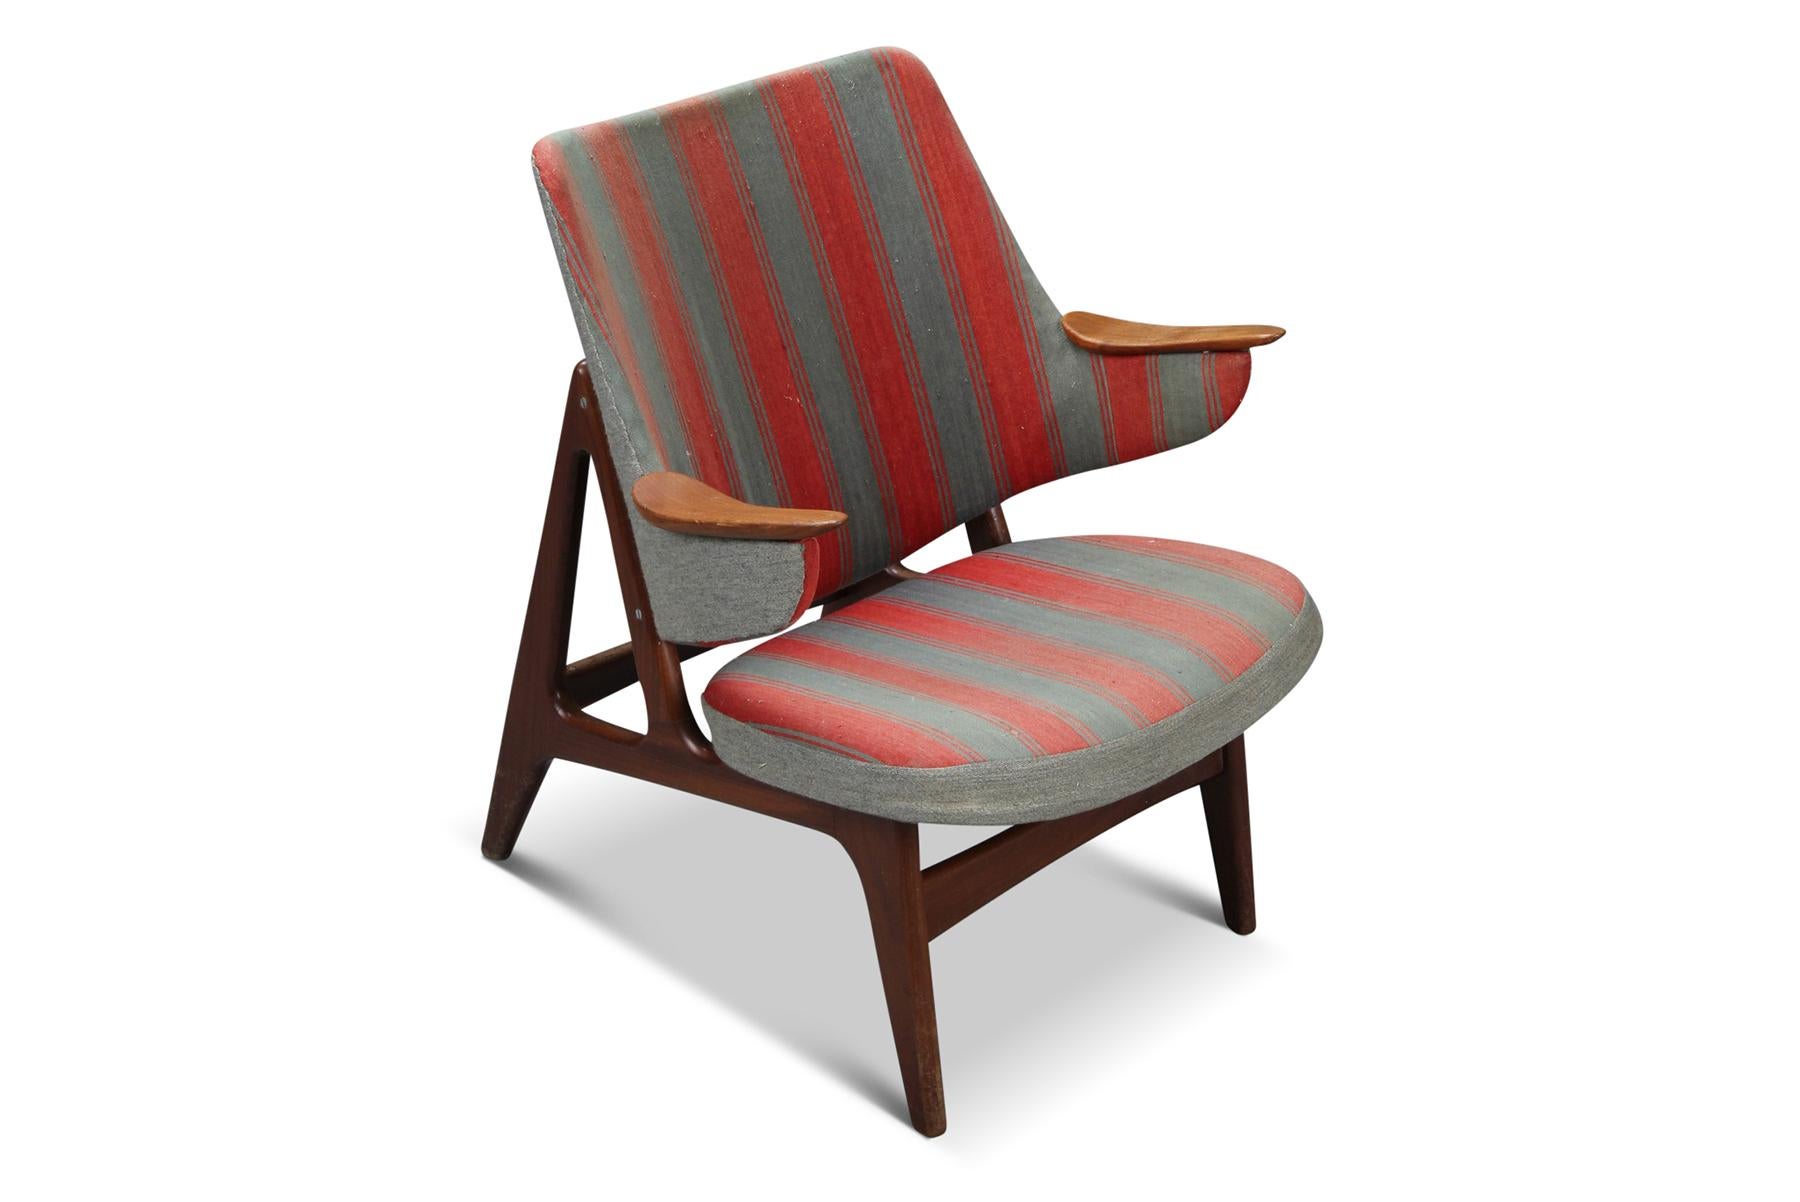 A Frame Lounge Chair in Teak by Carl Edward Matthes In Good Condition For Sale In Berkeley, CA